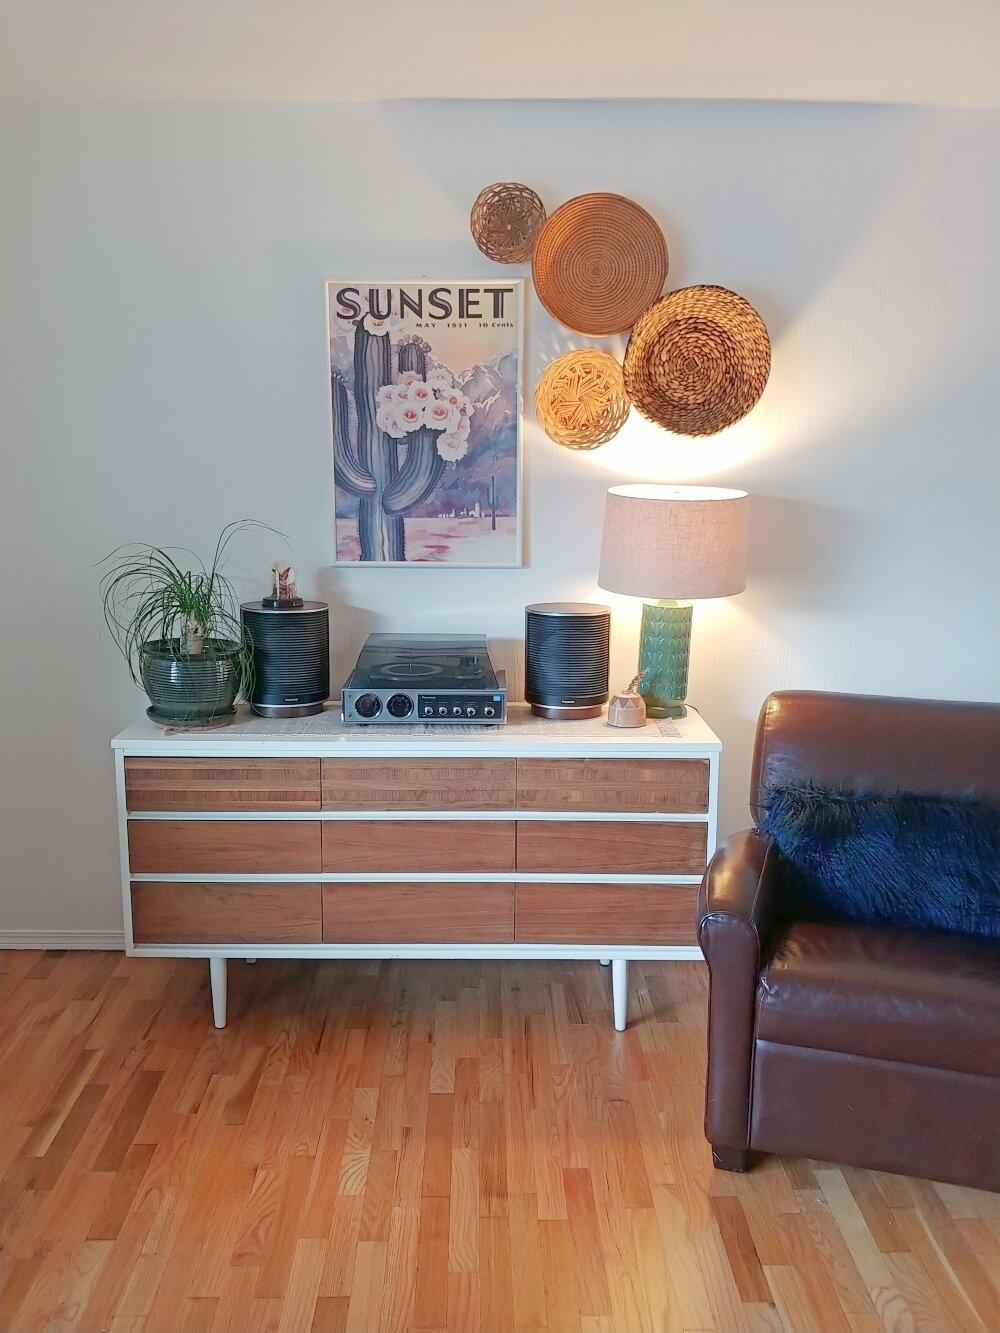 Thrift the Look - Eclectic Decor